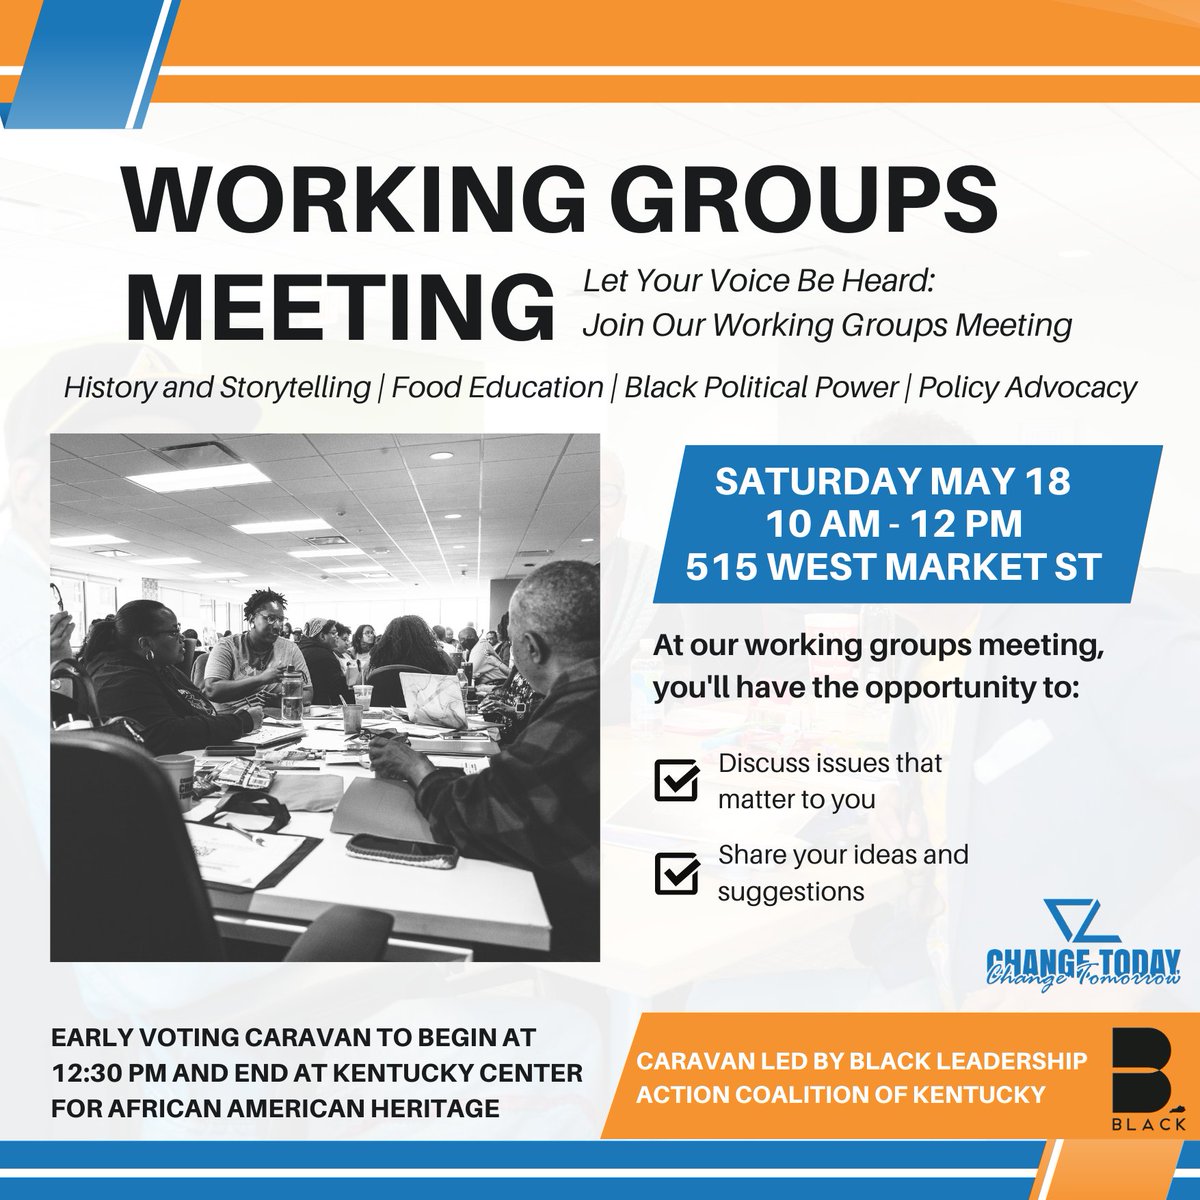 Join us at our Working Groups Meeting on Sat, May 18th from 10AM-12PM at 515 West Market St. Let's create positive change together in our #CommUNITY! More info at tinyurl.com/39hws44n